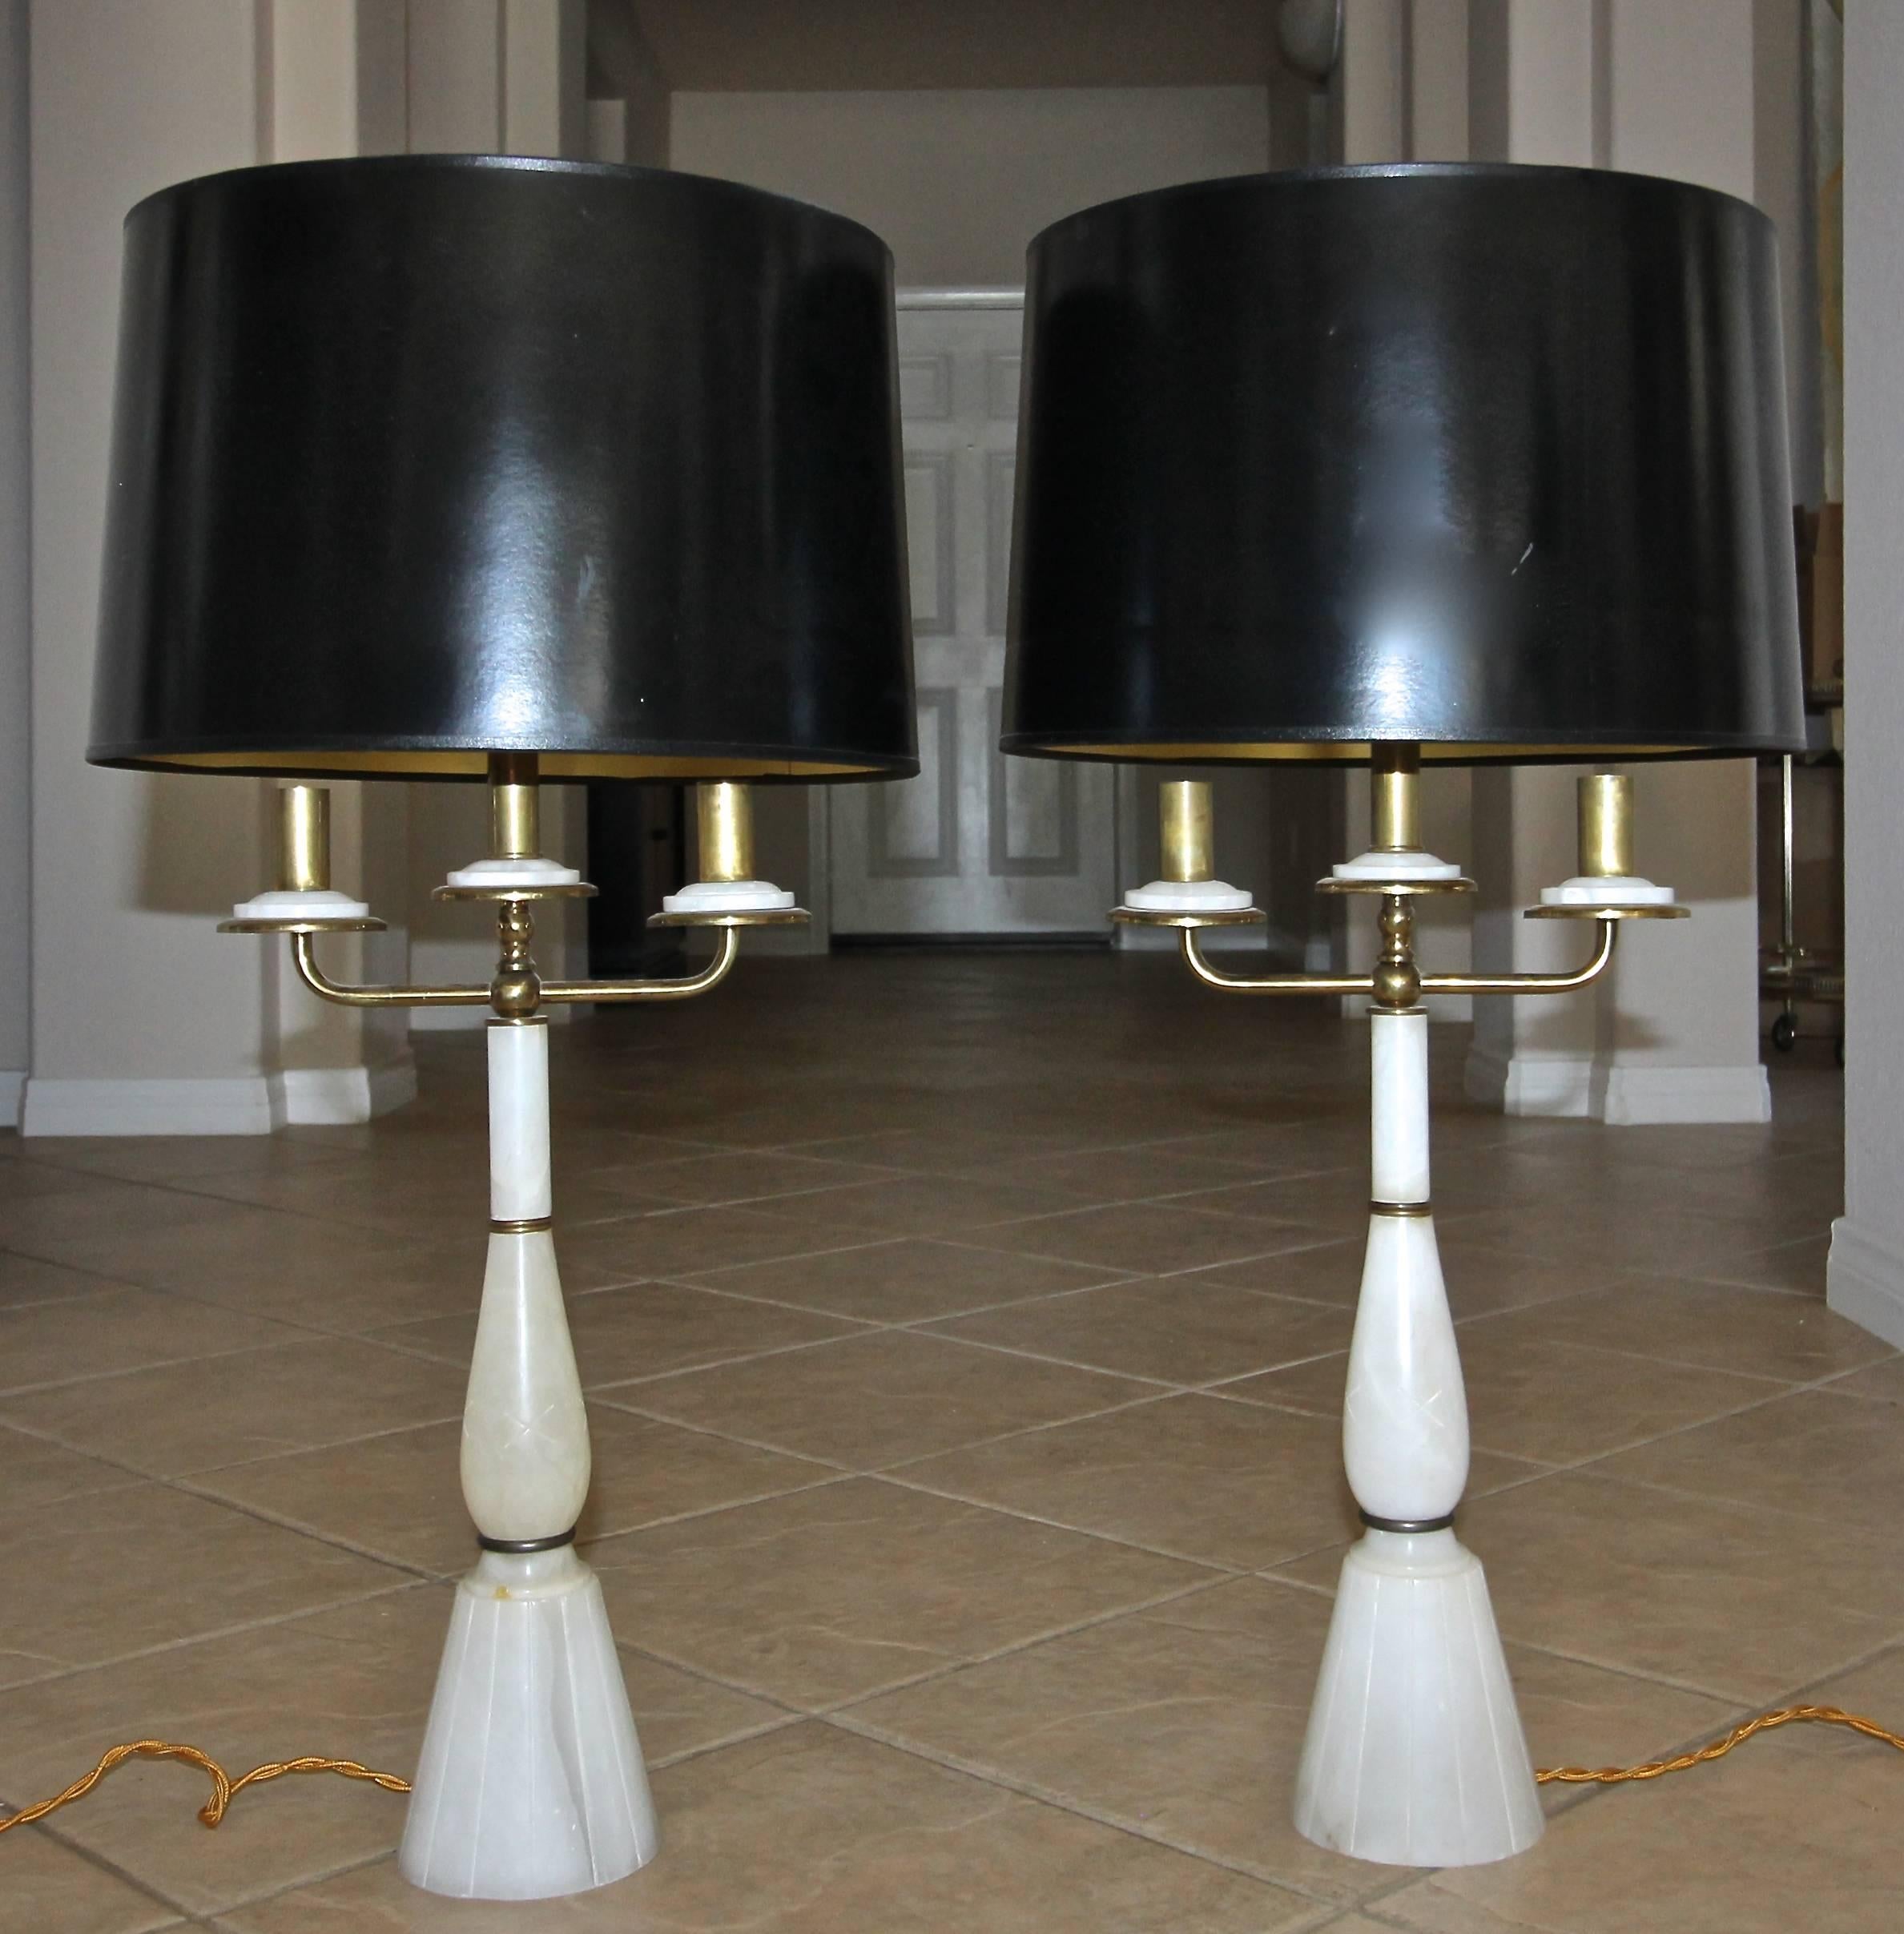 Pair of Gio Ponti style 1940s Italian alabaster candelabra lamps with brass arms and fittings. Newly restored and rewired with full range dimmer socket and rayon covered French style cord. Shades not included for photography purposes only.